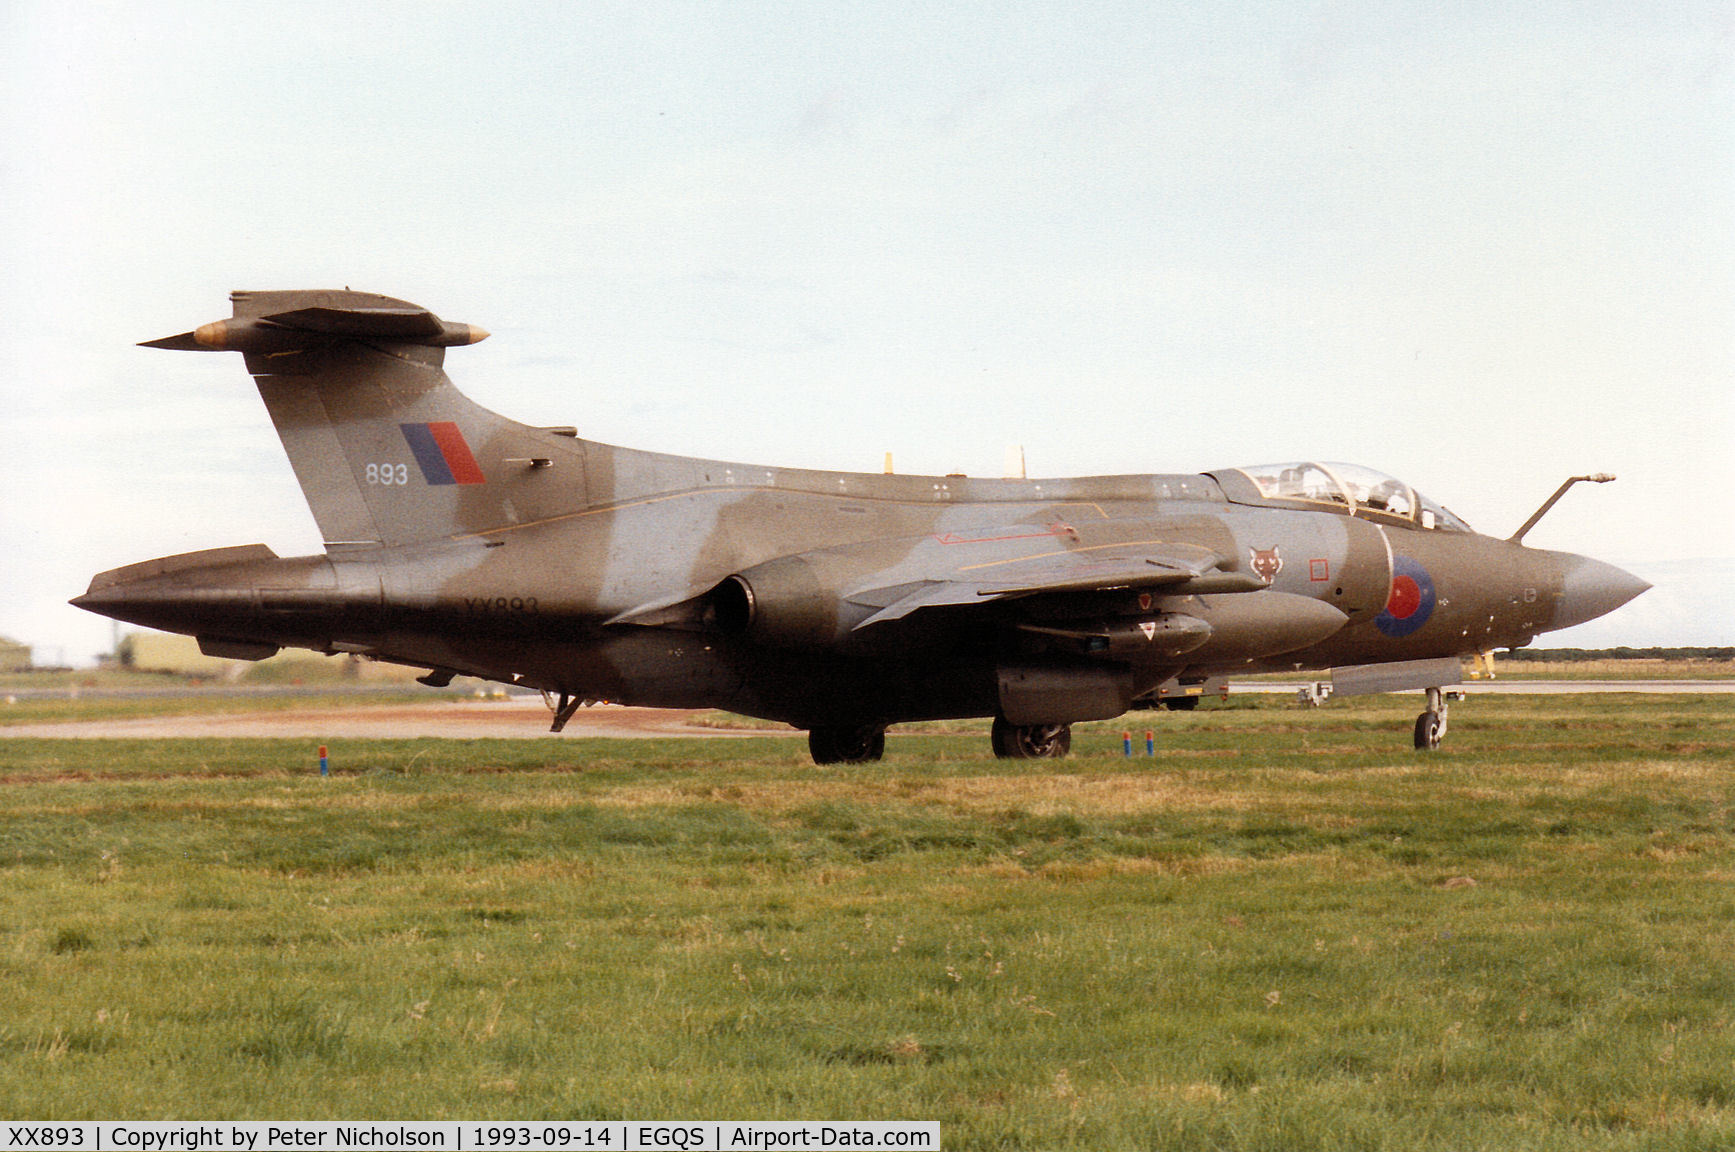 XX893, 1975 Hawker Siddeley Buccaneer S.2B C/N B3-02-74, Buccaneer S.2B of 12 Squadron taxying to the active runway at RAF Lossiemouth in September 1993.